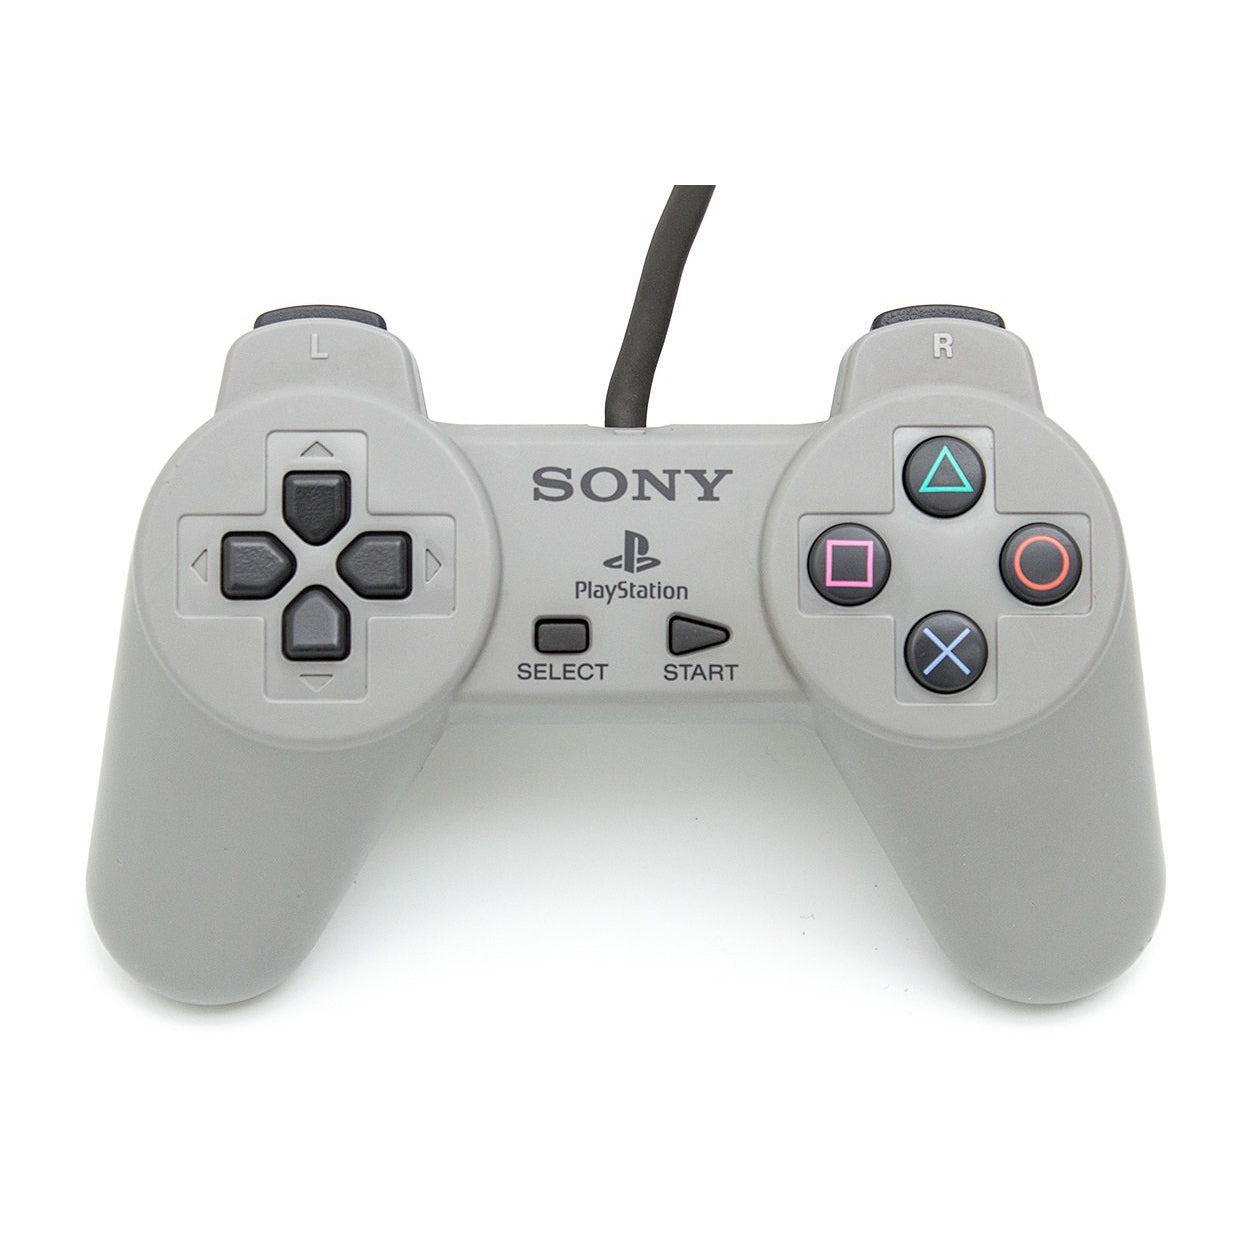 Sony PlayStation 1 (PS1) Official Digital Controller - Gray - YourGamingShop.com - Buy, Sell, Trade Video Games Online. 120 Day Warranty. Satisfaction Guaranteed.